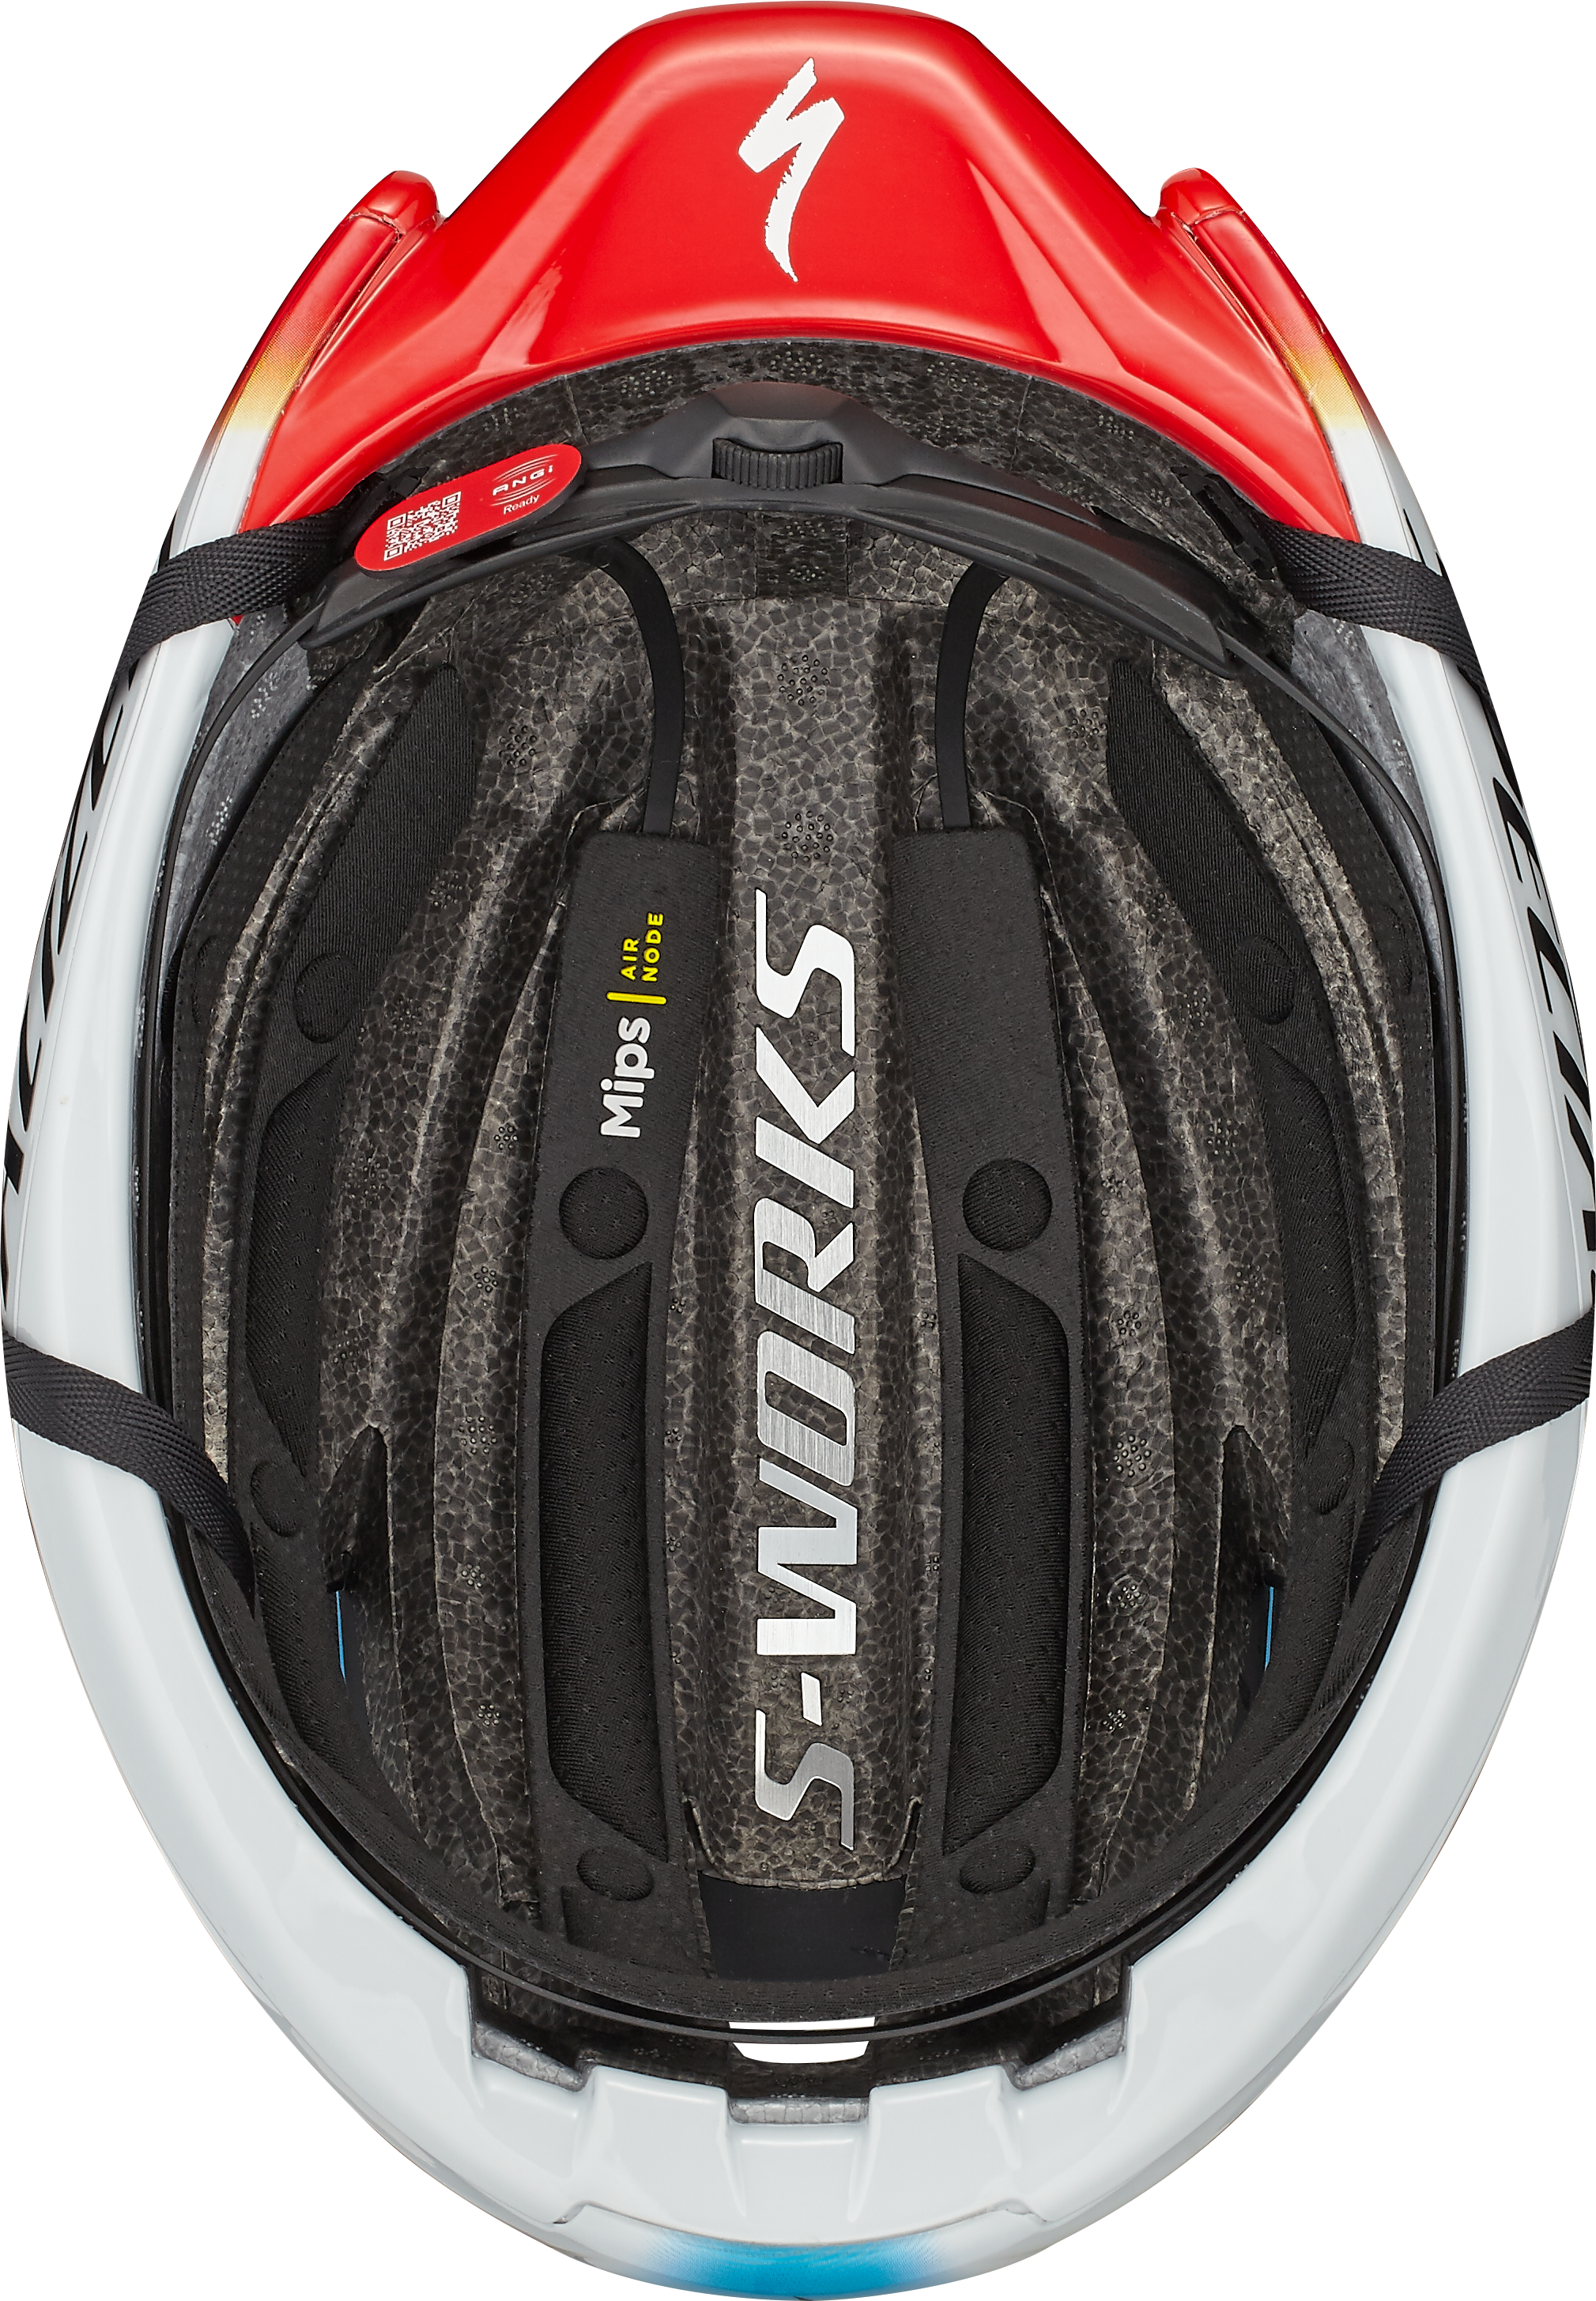 S-WORKS EVADE 3 TEAM REPLICA HLMT CE TOTAL ENERGIES ROUND M(Round 